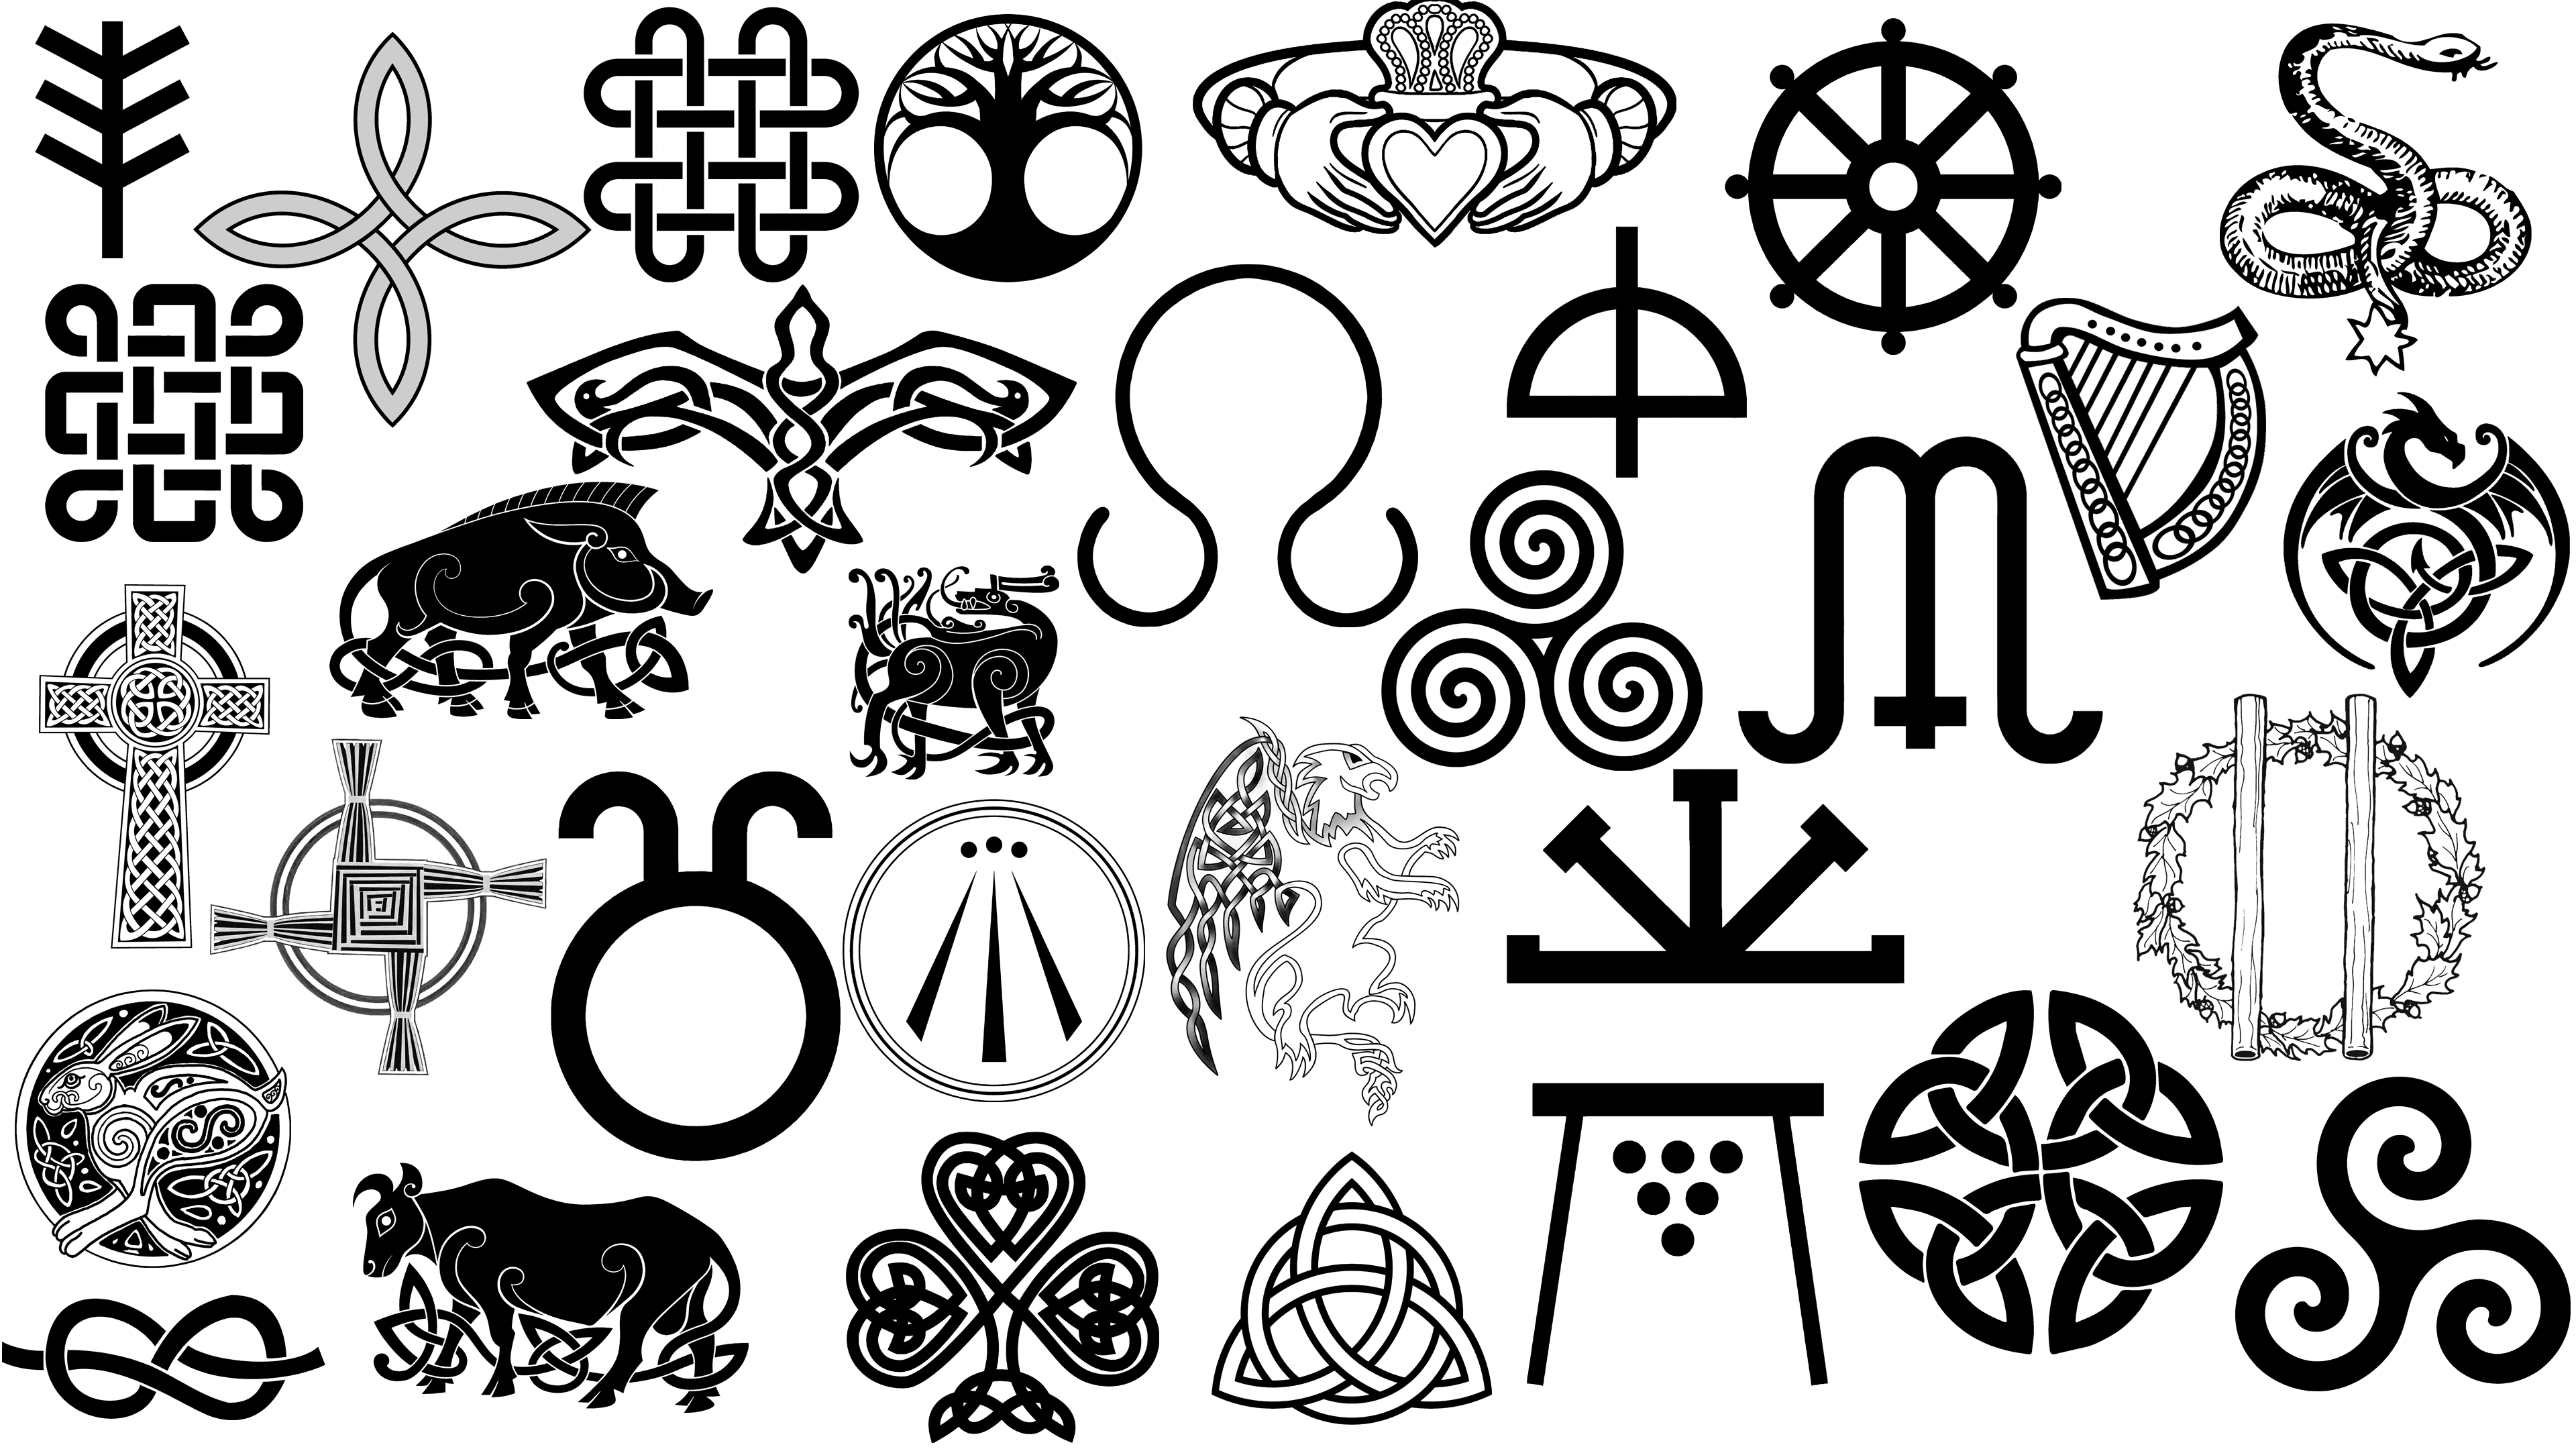 Celtic symbols and meanings